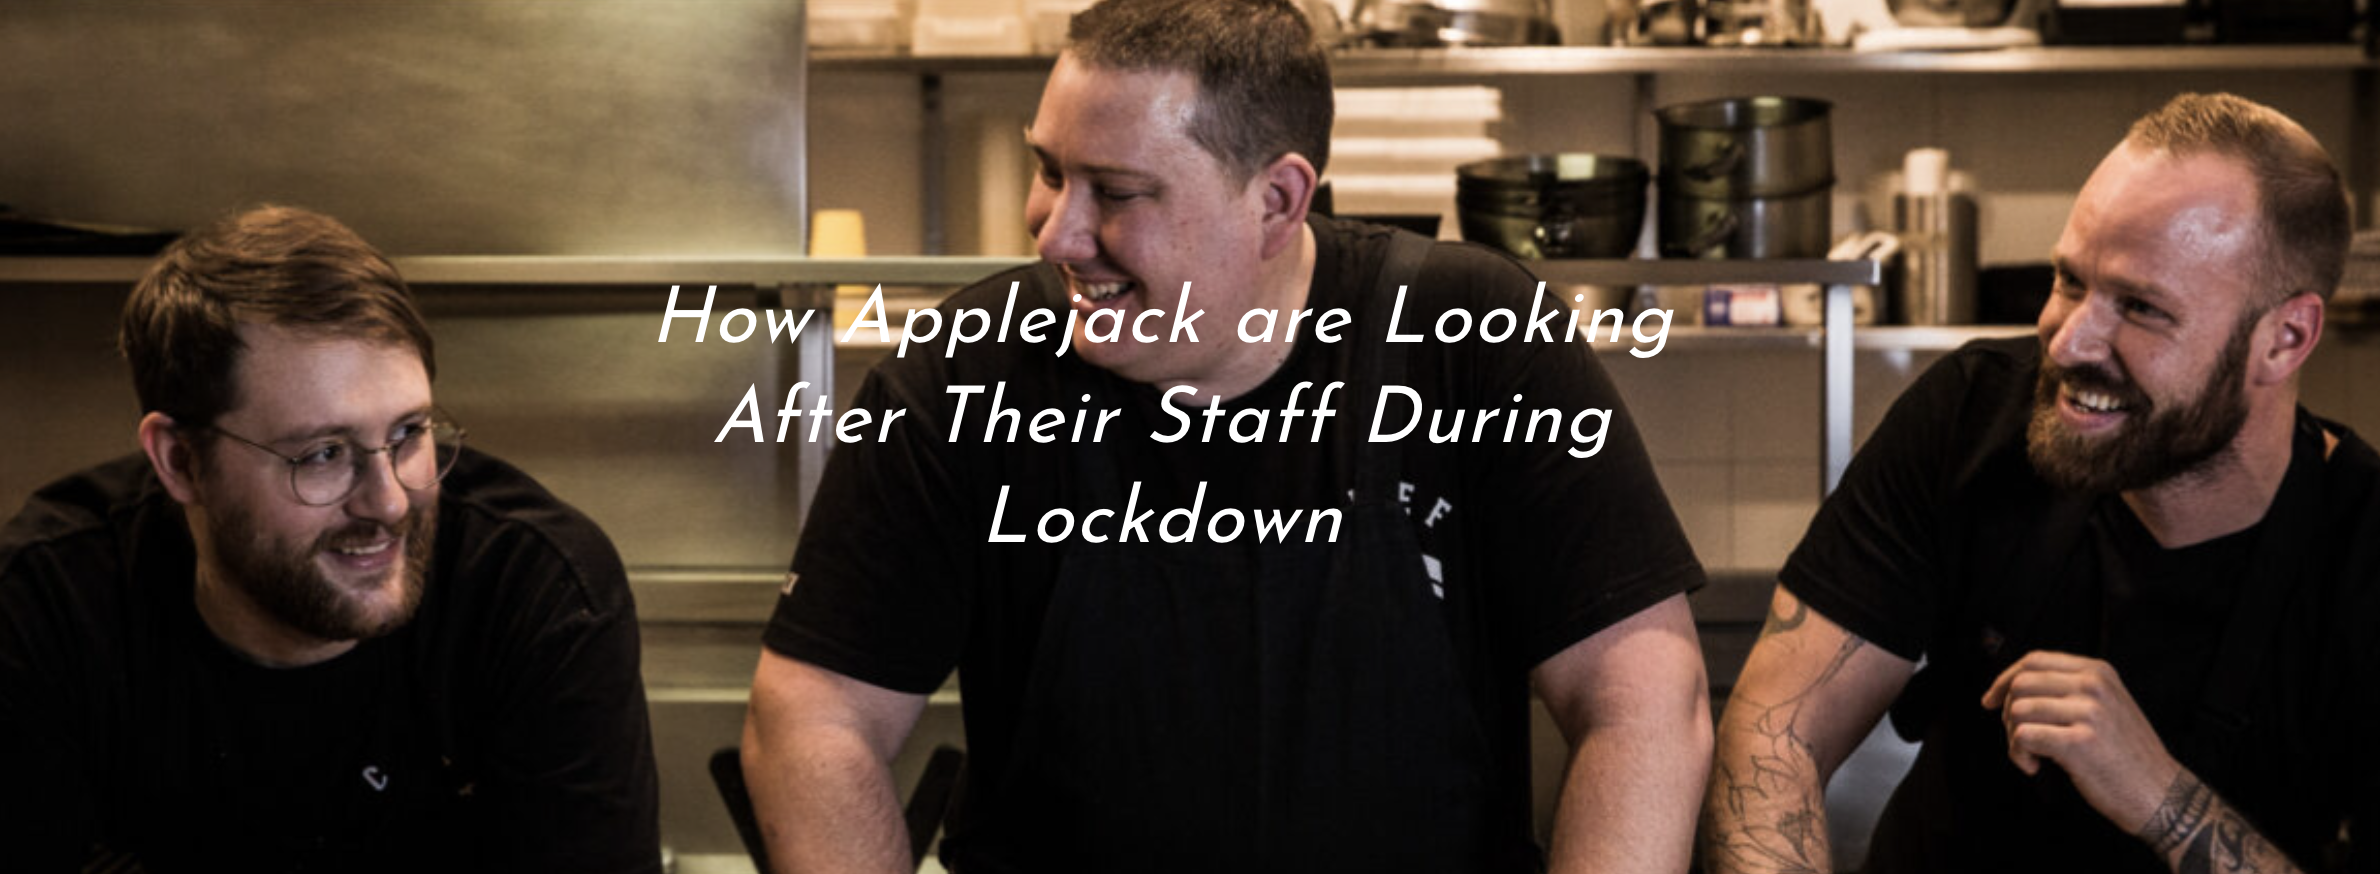 How Applejack are Looking After Their Staff During Lockdown